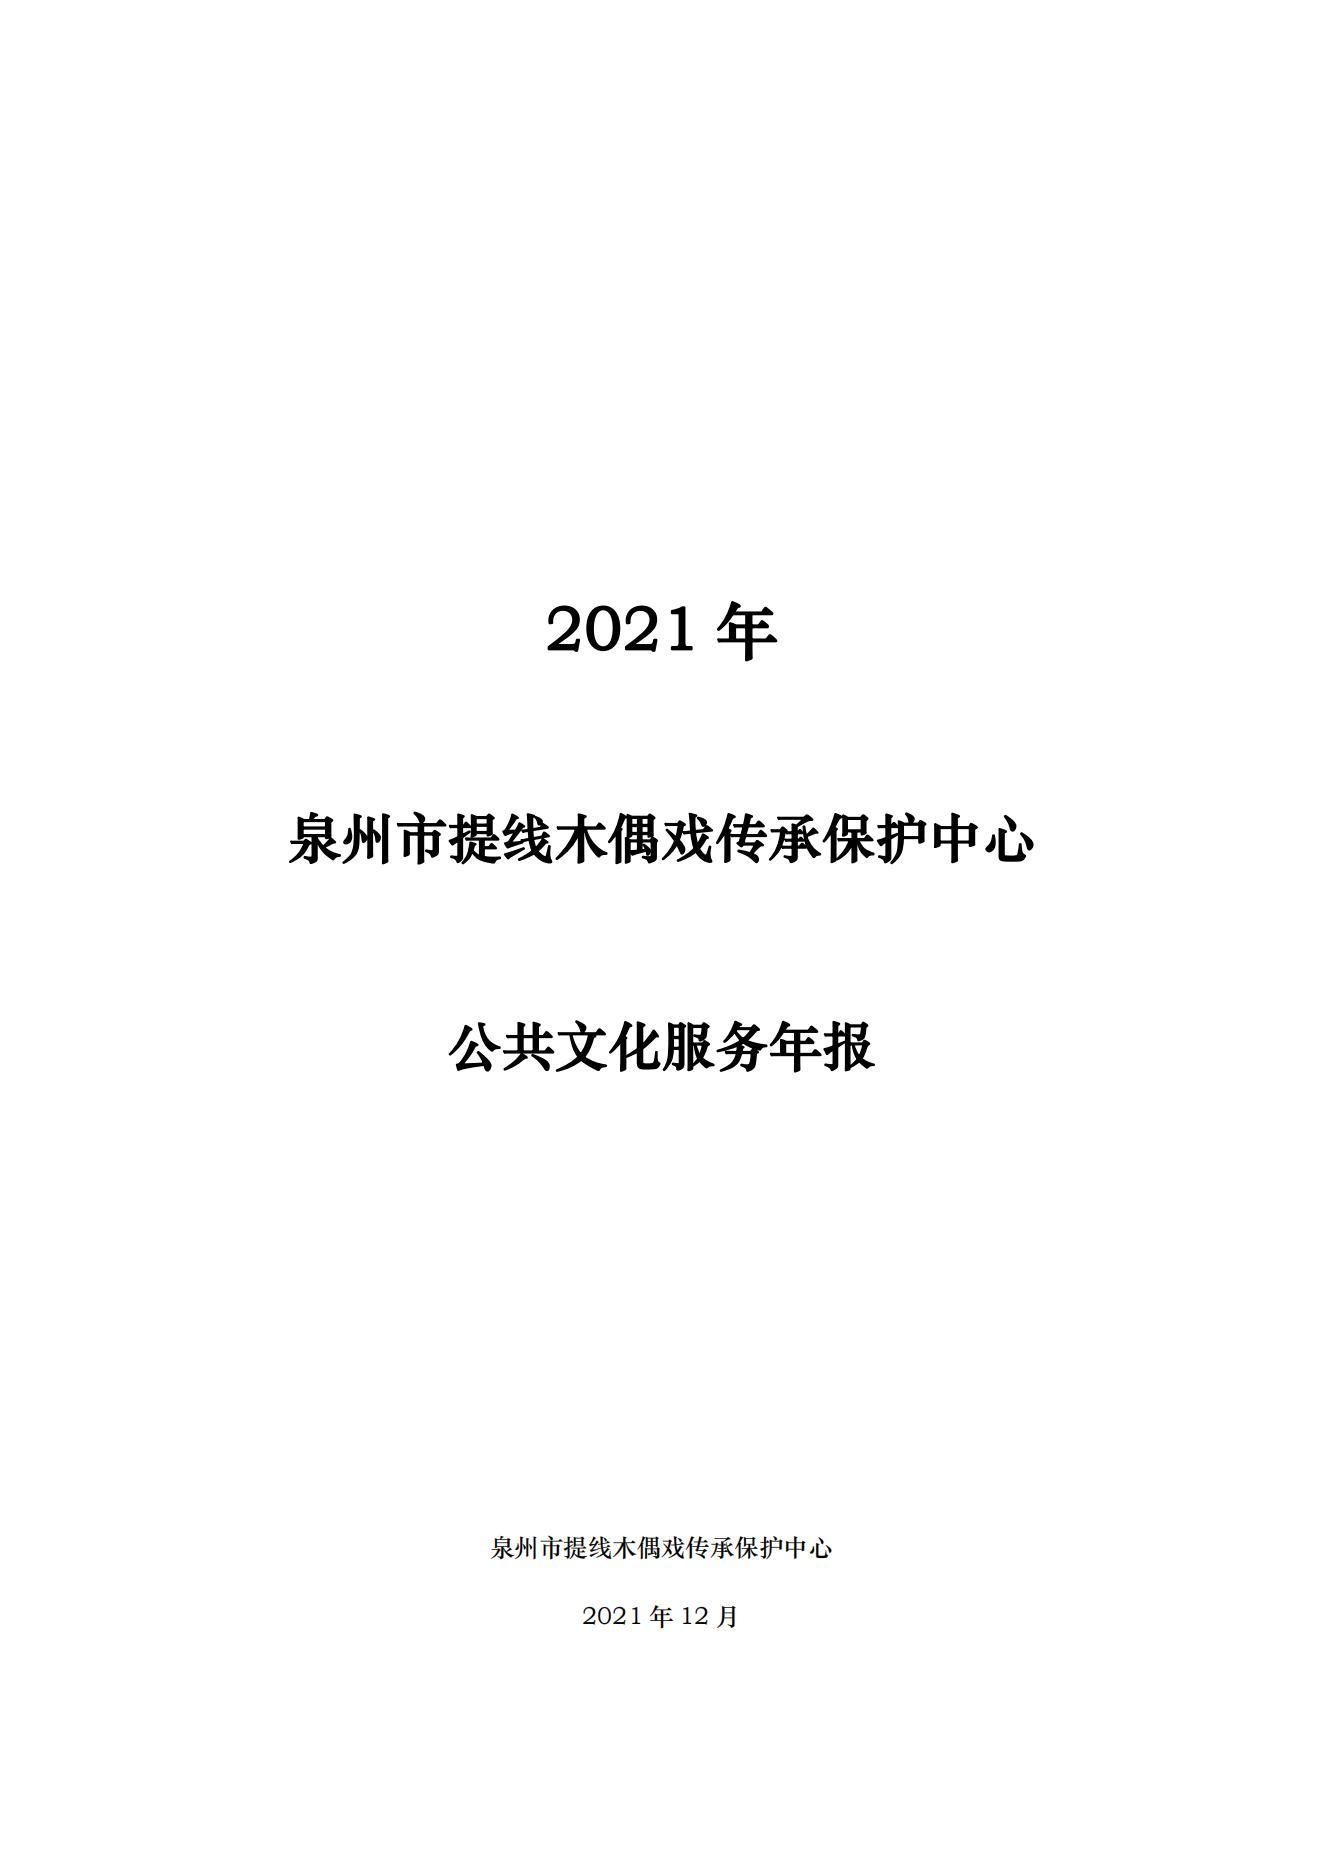 2021 Annual Report on the Public Cultural Service System of Quanzhou Tideline Puppet Theater Heritage Protection Center